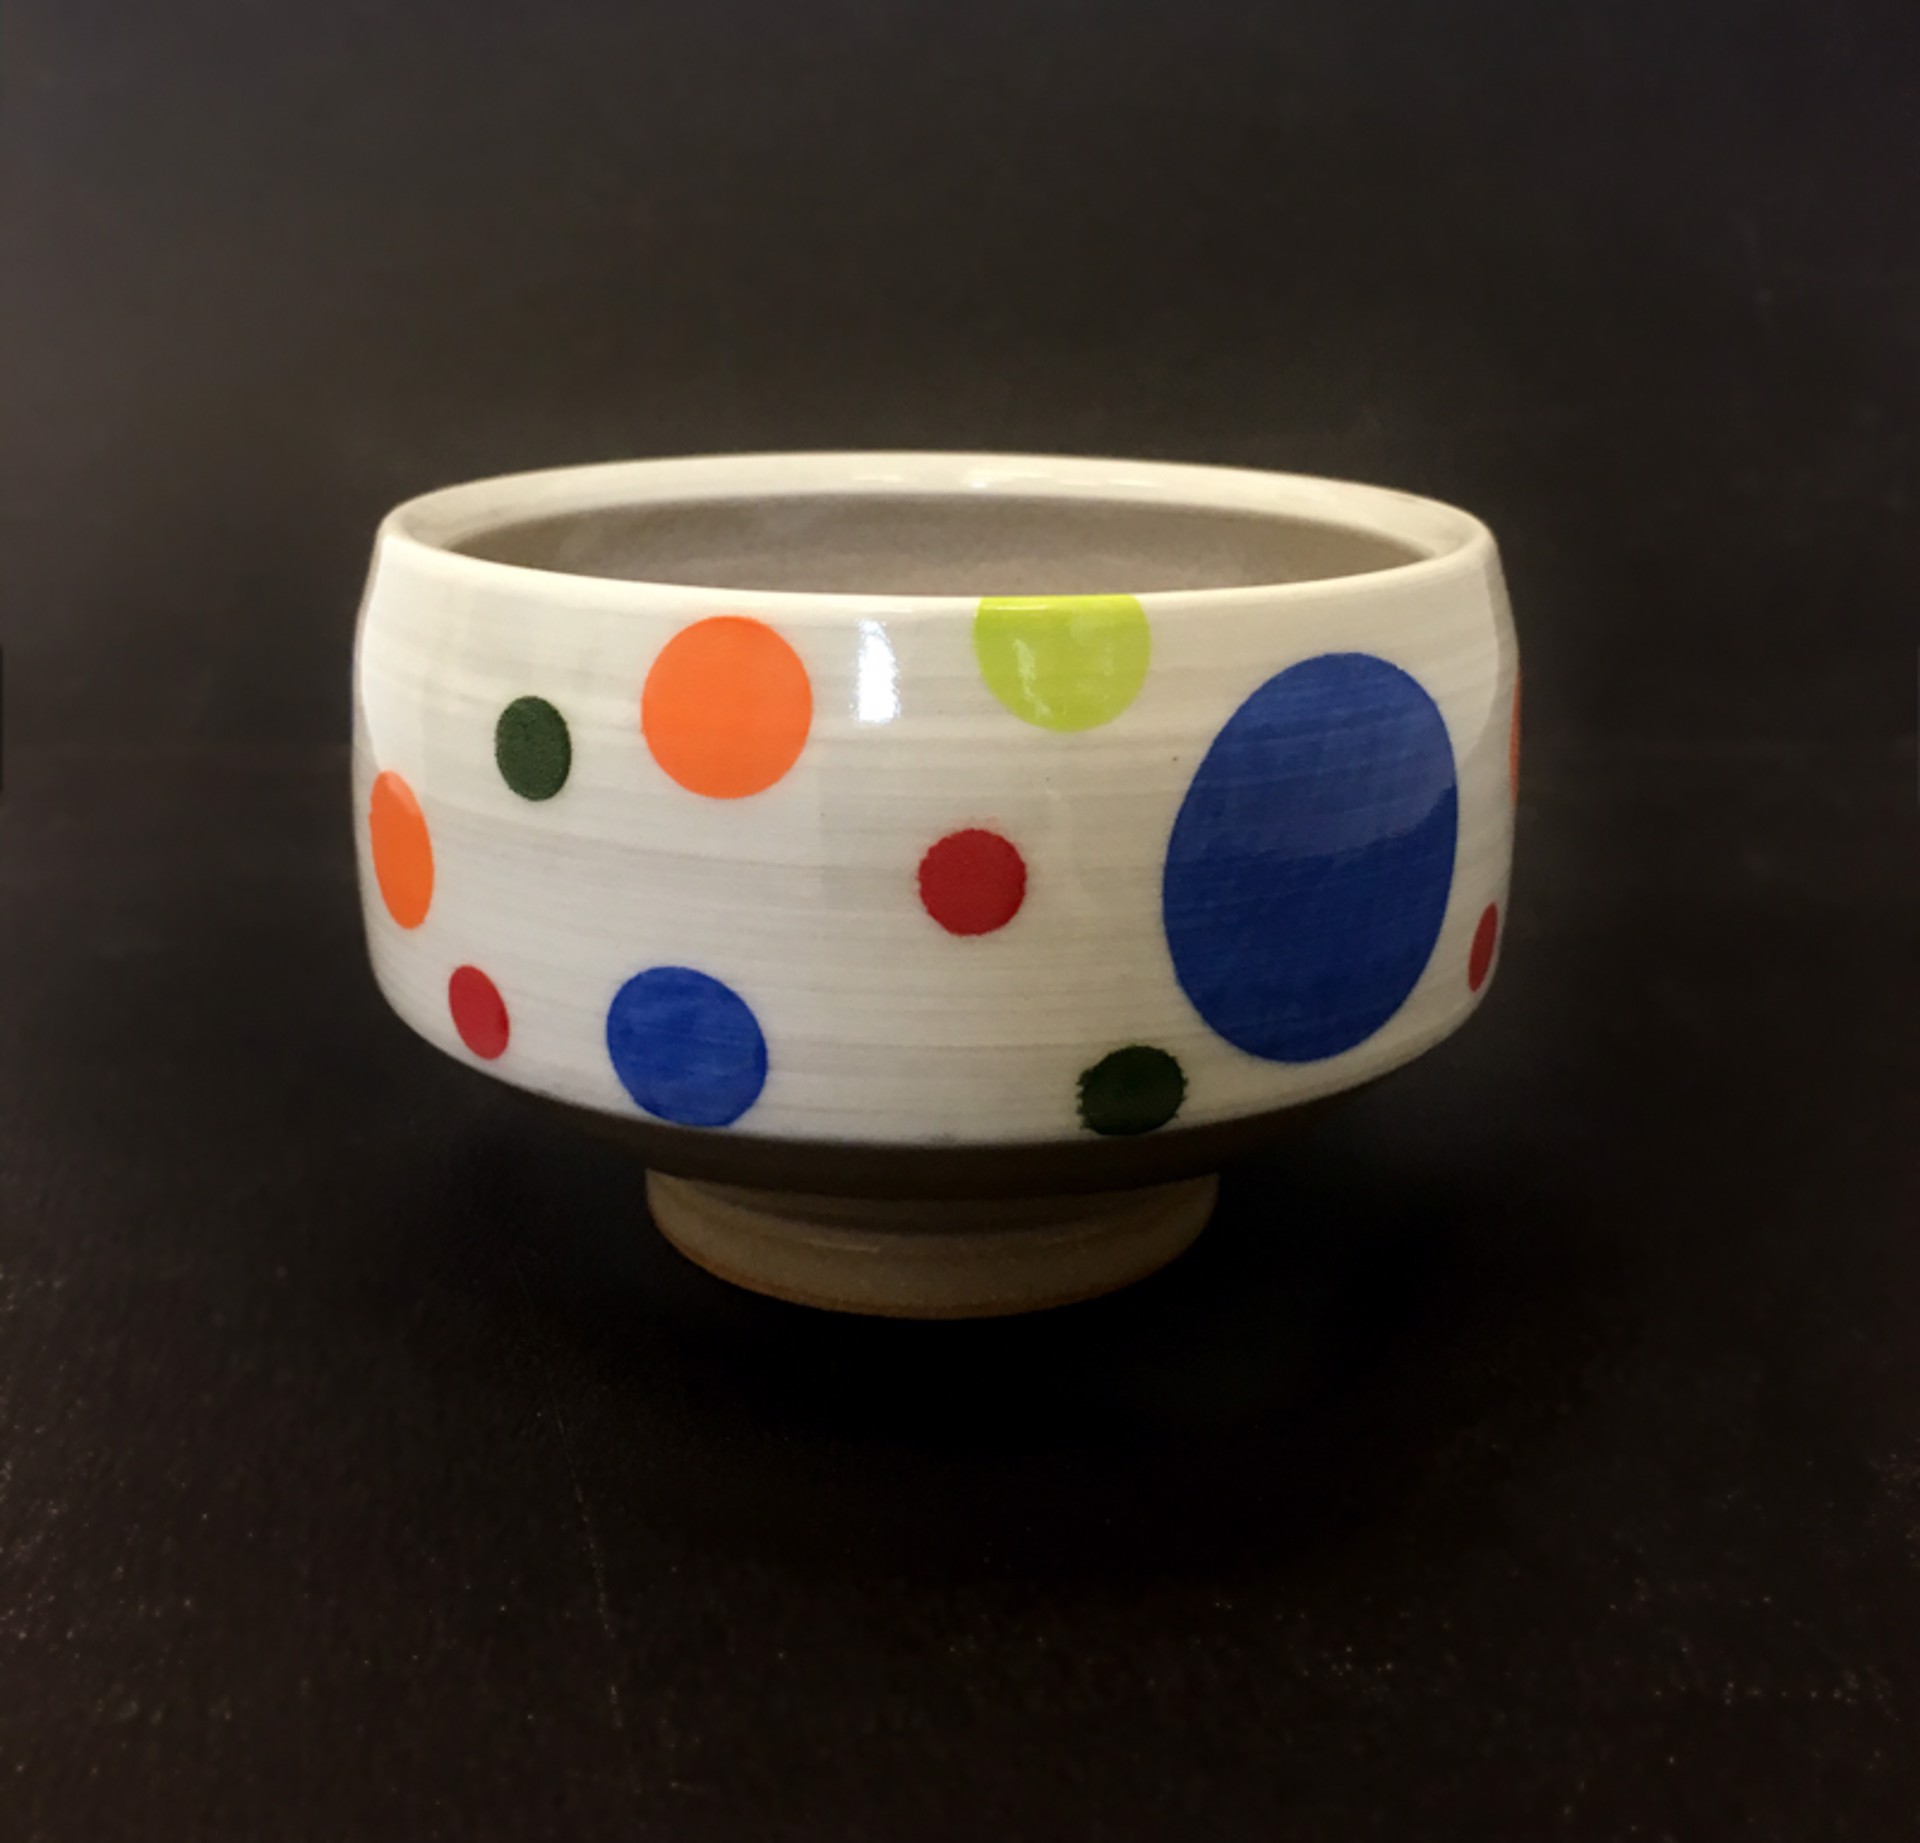 Large Bowl with Dots by Doug Schroder